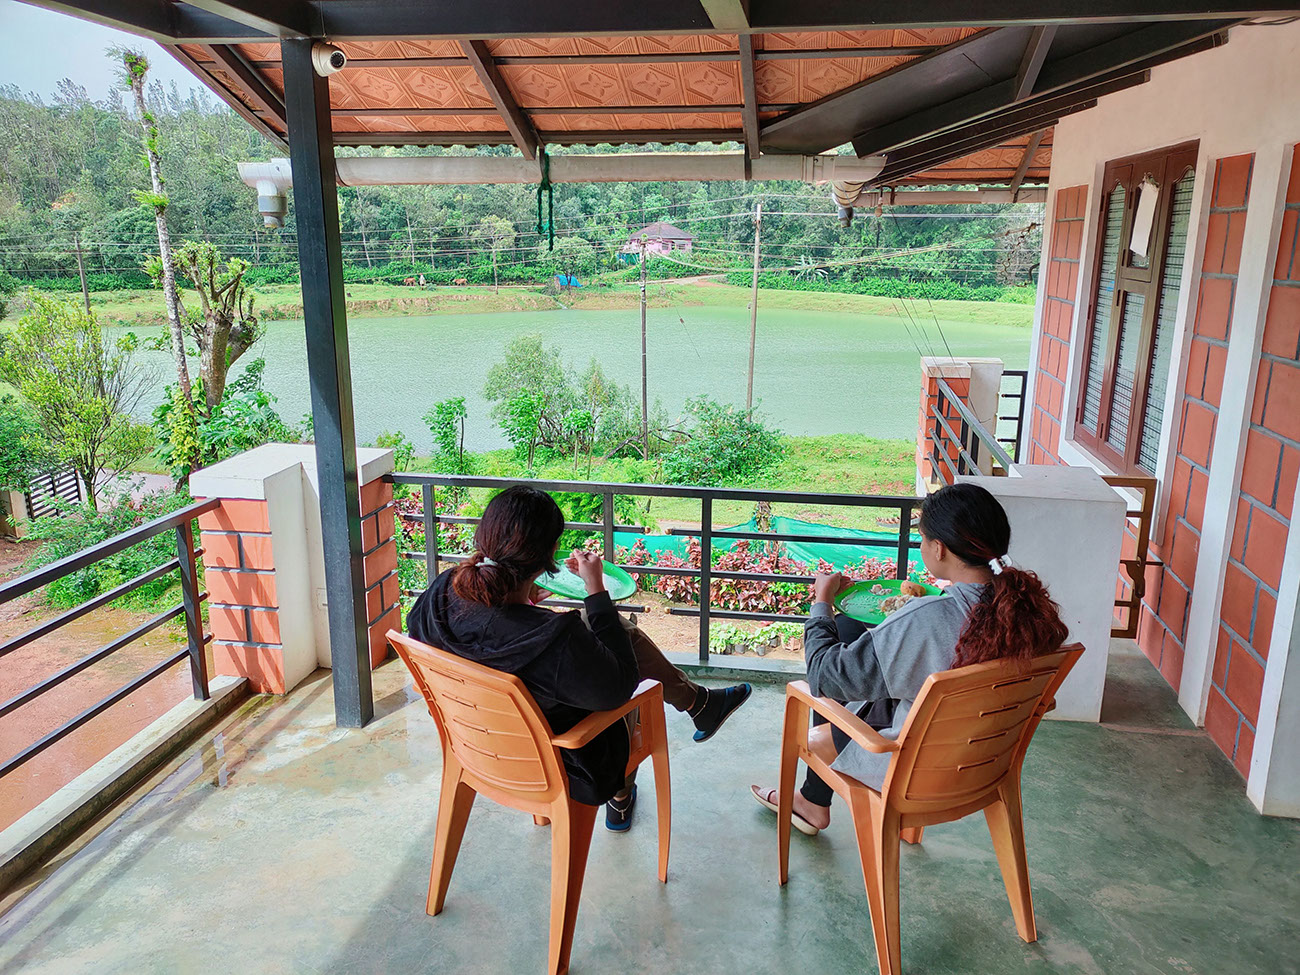 The best way to enjoy Coorg is staying in a homestay when it is raining